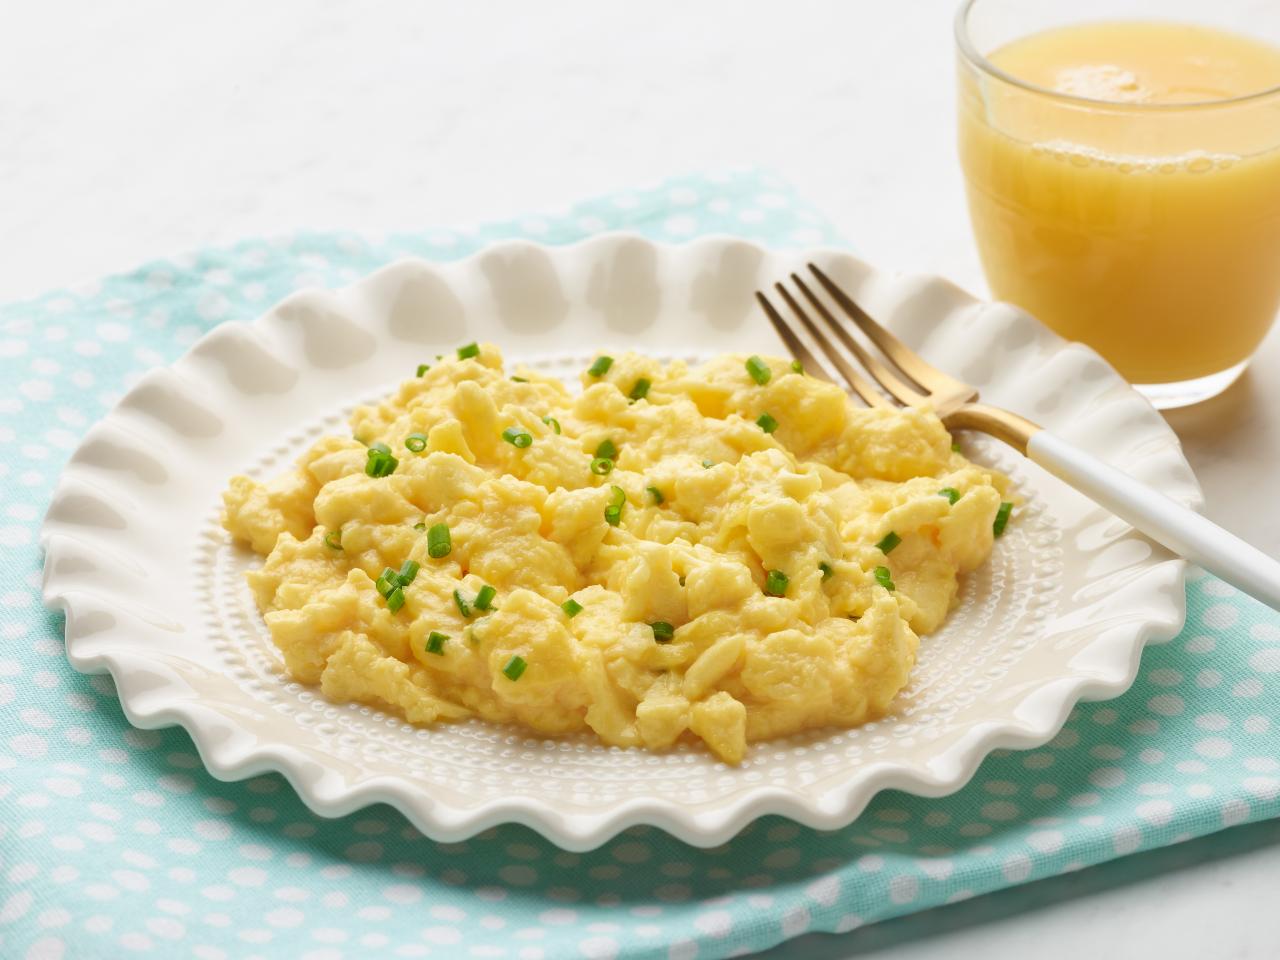 How to Make Scrambled Eggs {Easy Tutorial} - FeelGoodFoodie